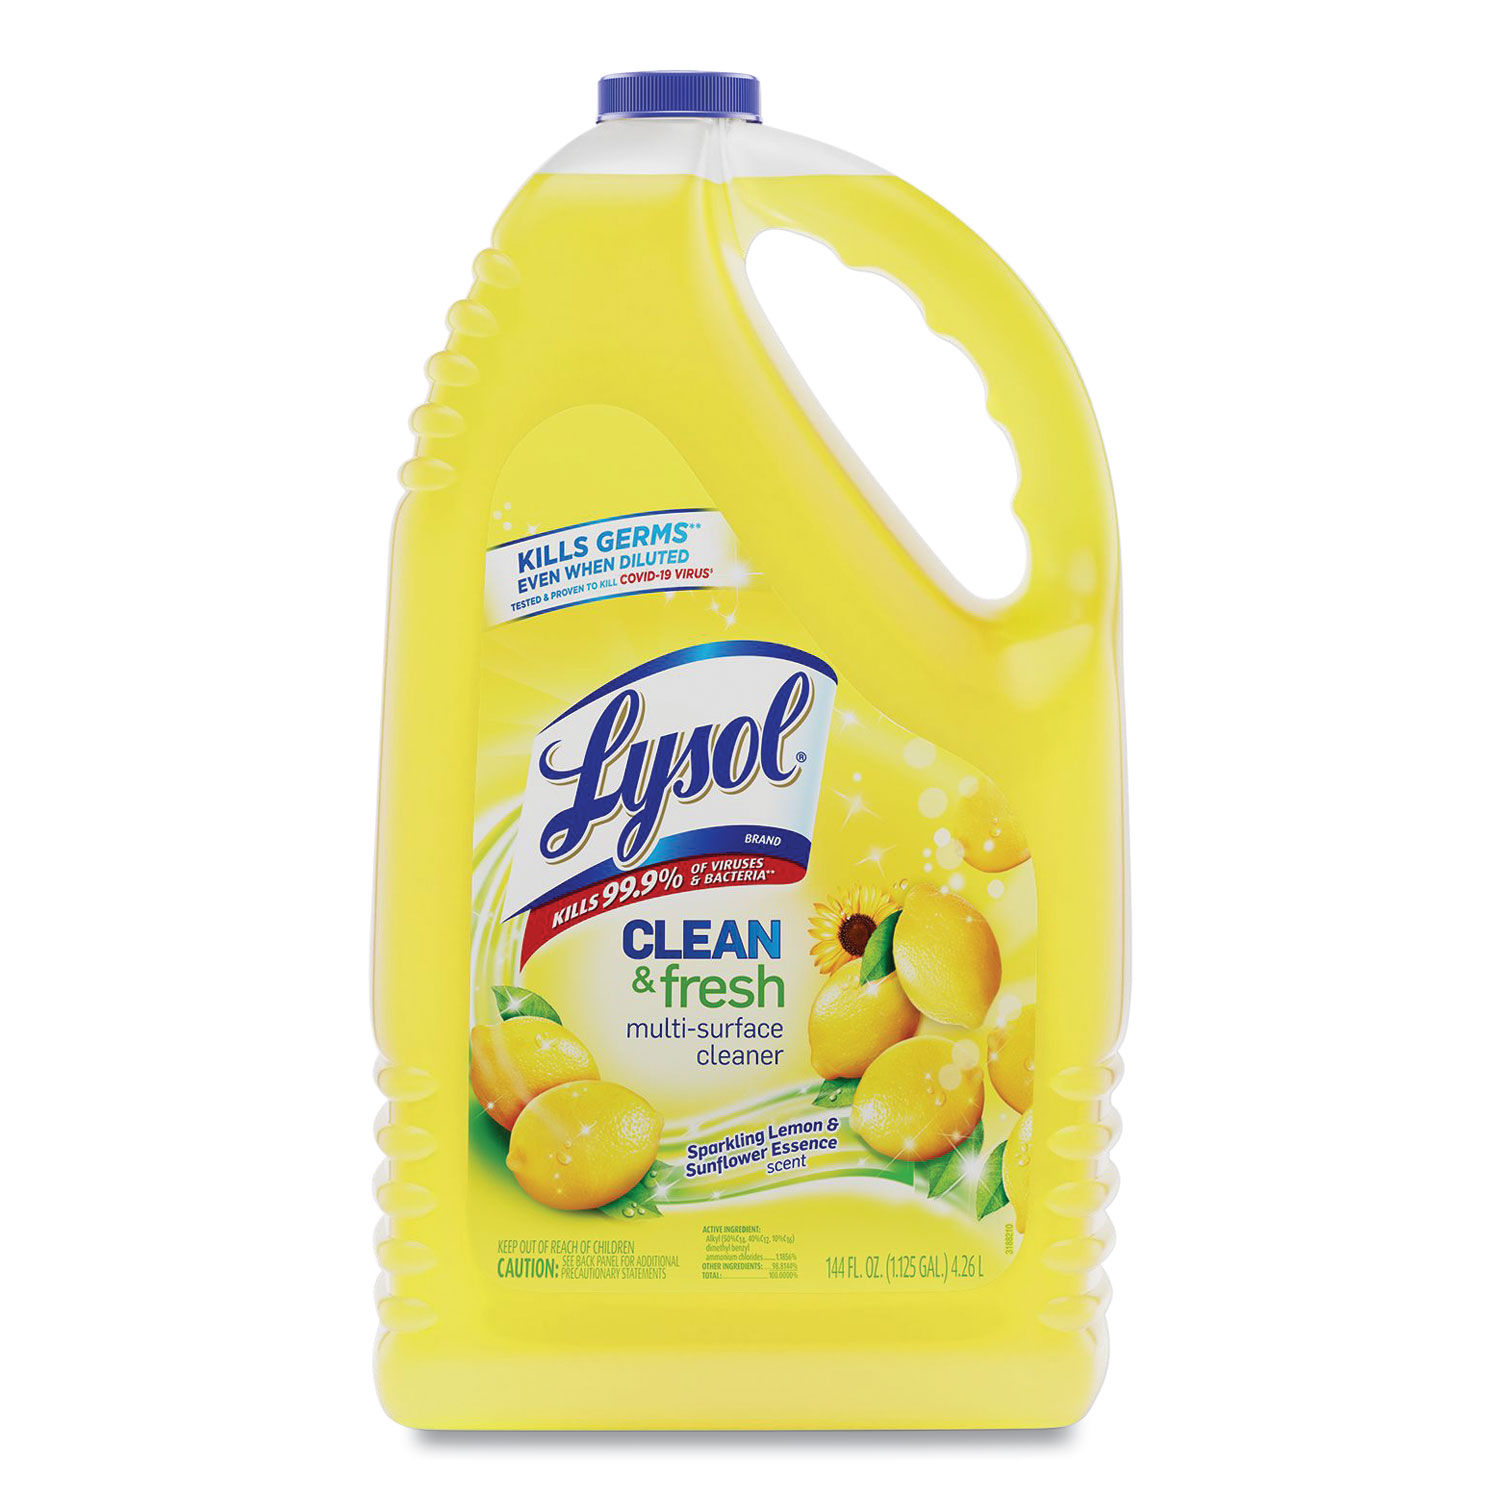 Clean and Fresh Multi-Surface Cleaner Sparkling Lemon and Sunflower Essence, 144 oz Bottle, 4/Carton